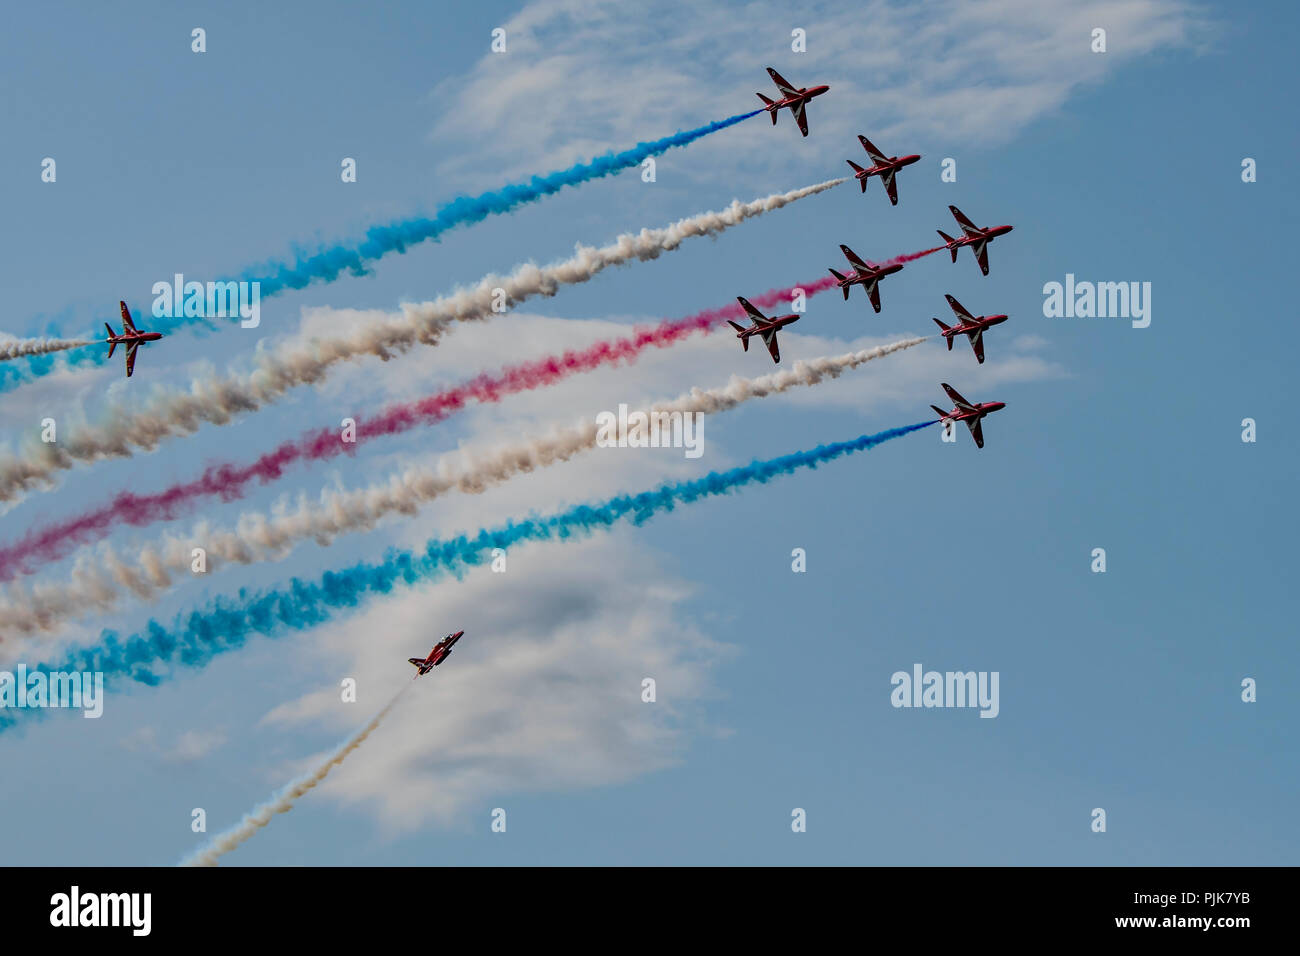 The RAF Red Arrows perform the Tornado manoeuvre during their afternoon display at Dunsfold Wings & Wheels, UK on the 25th August 2018. Stock Photo